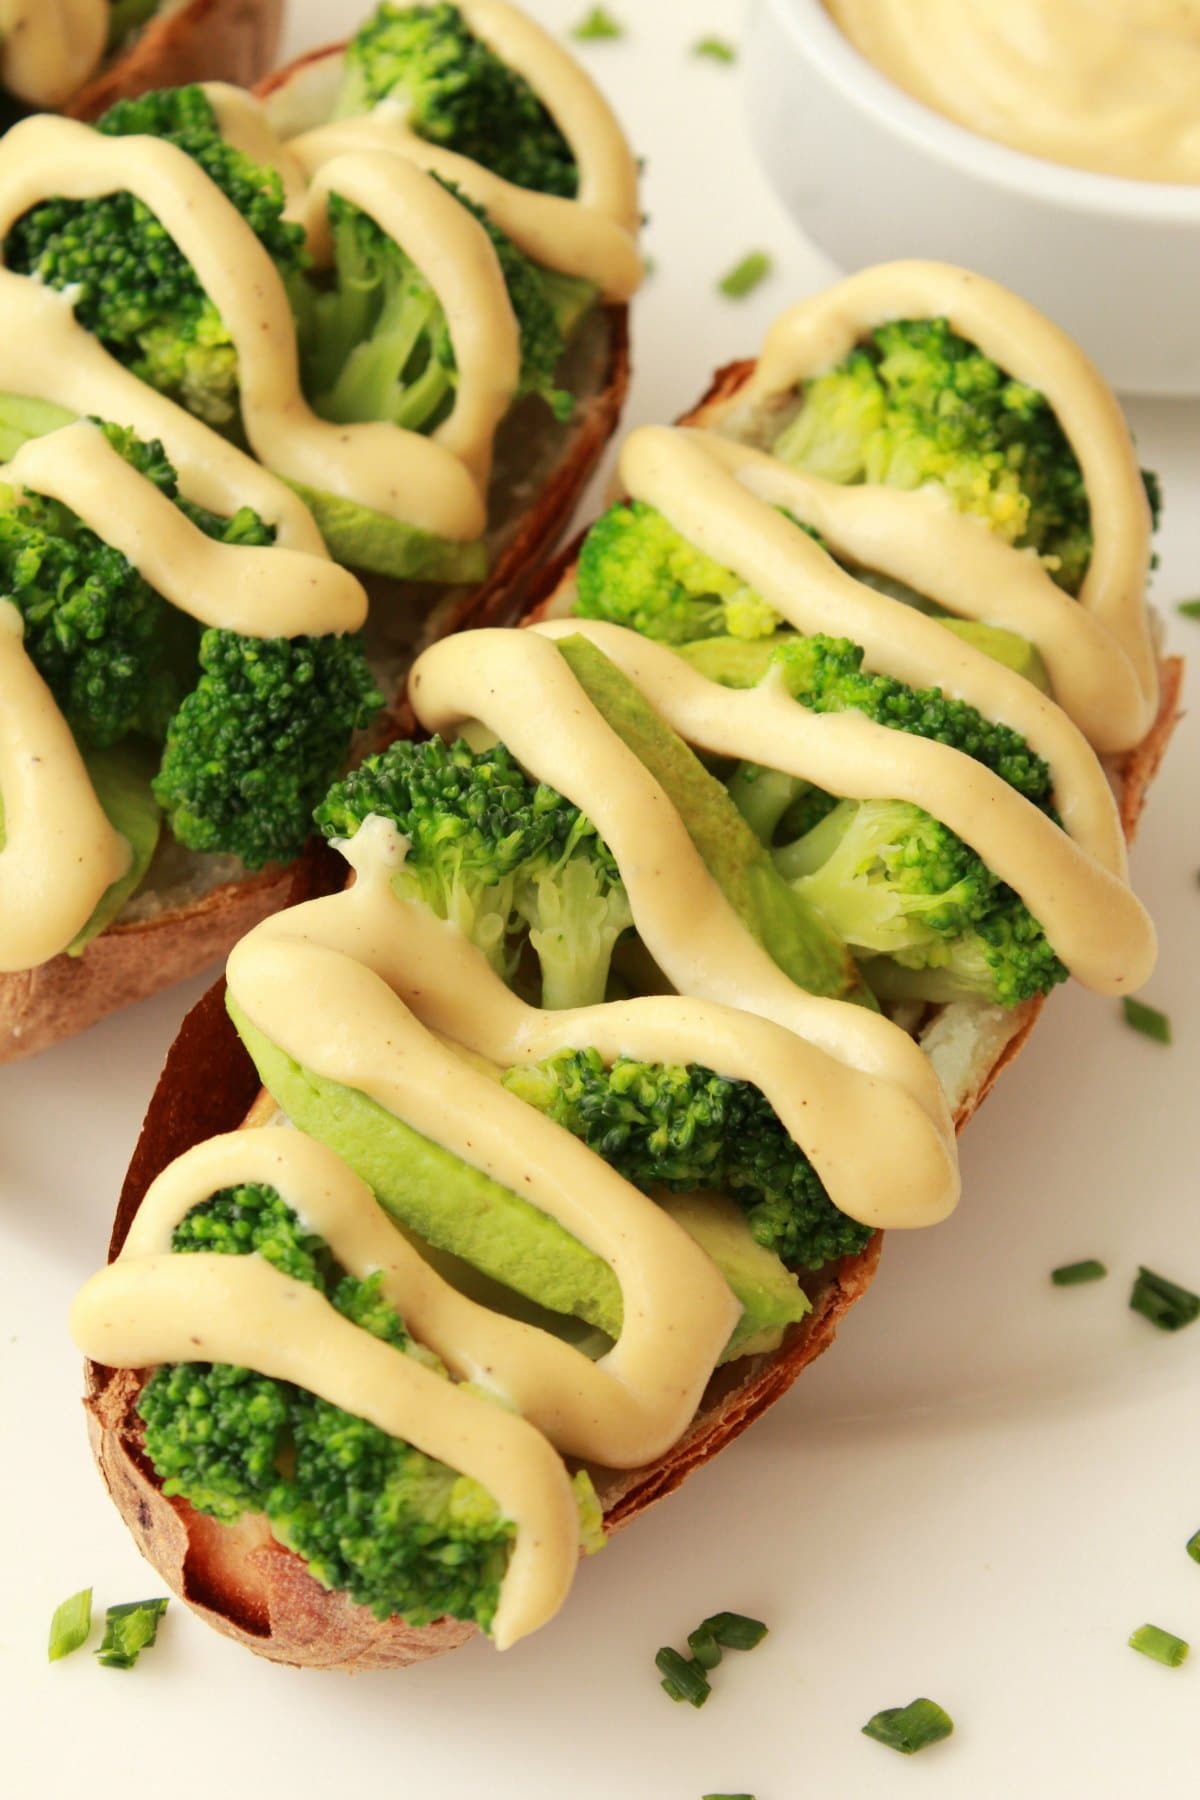 Cashew cheese sauce drizzled over baked potatoes, broccoli and avocado on a white plate. 